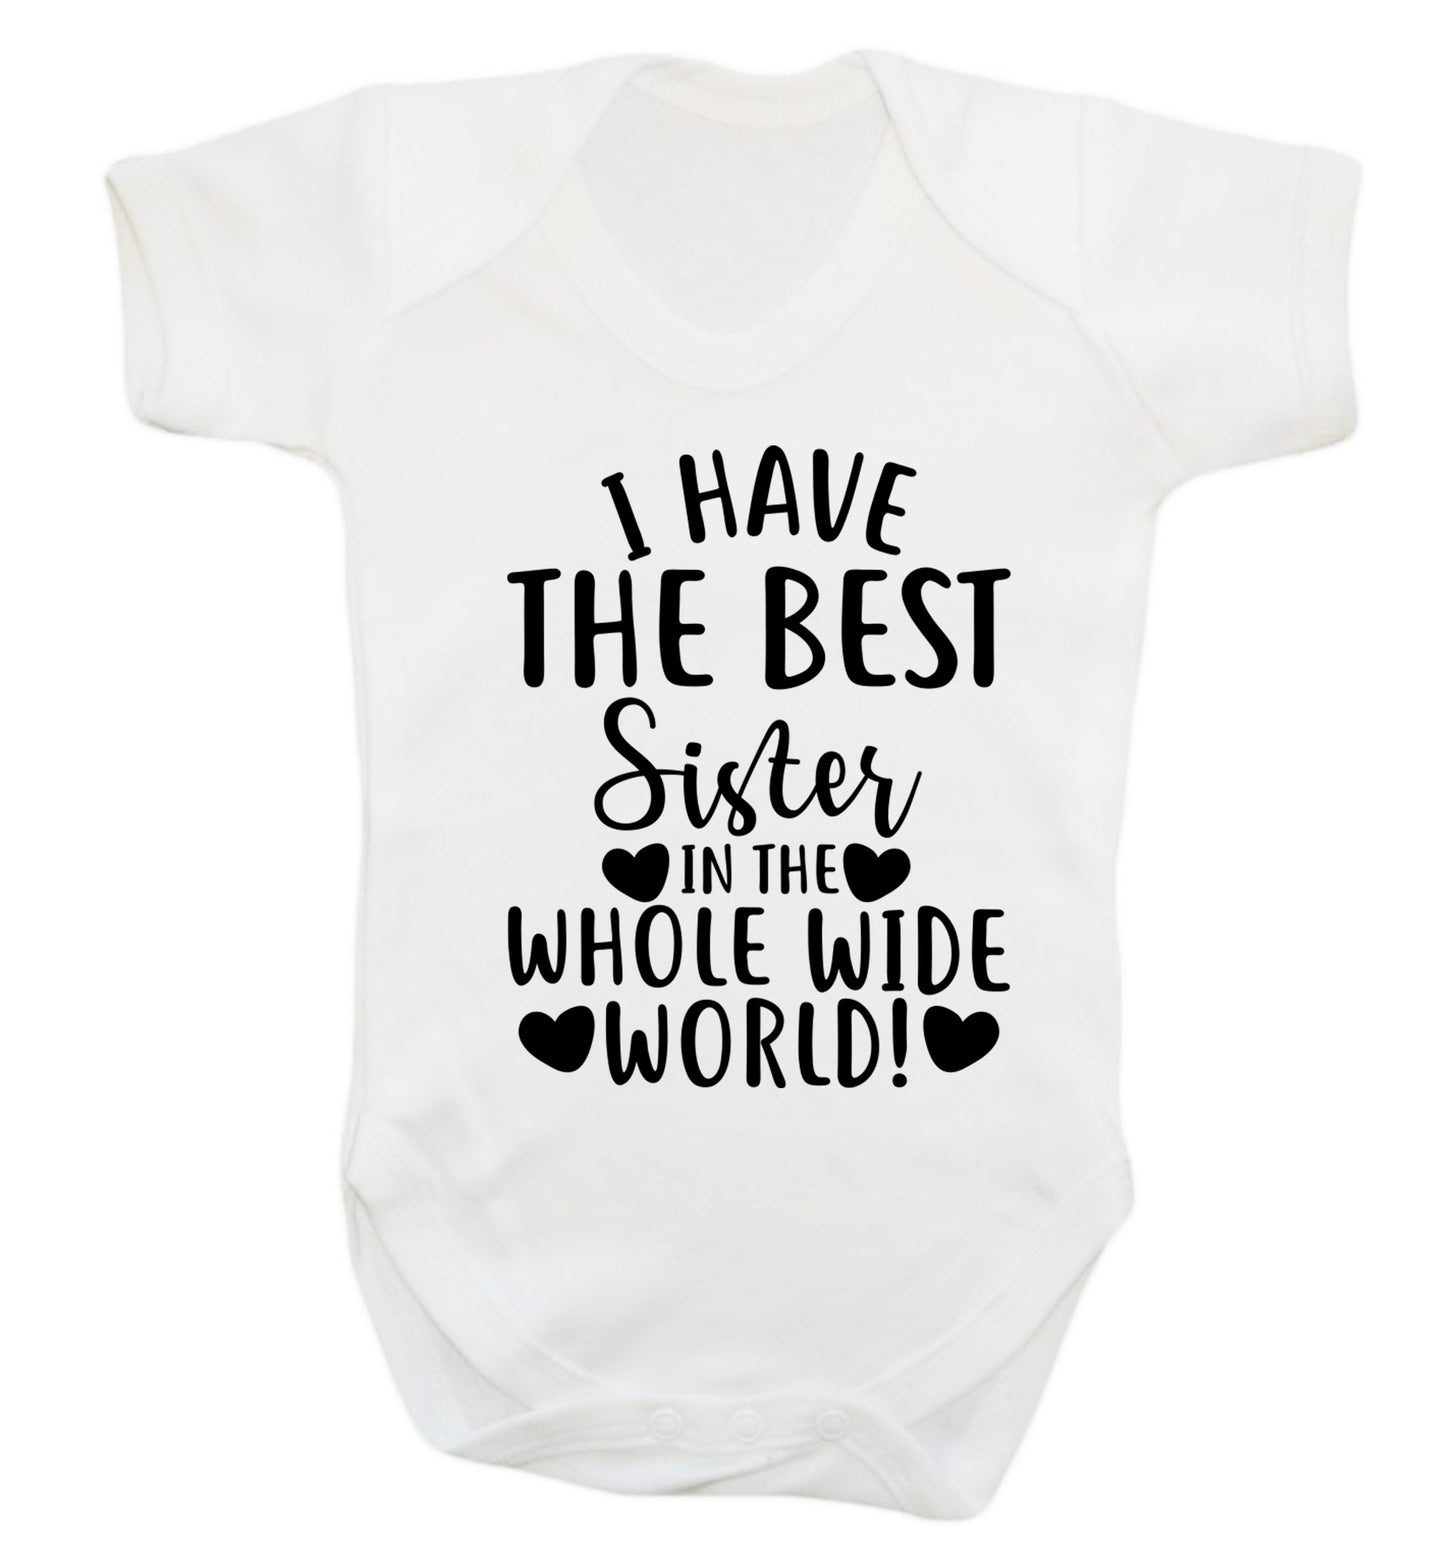 I have the best sister in the whole wide world! Baby Vest white 18-24 months